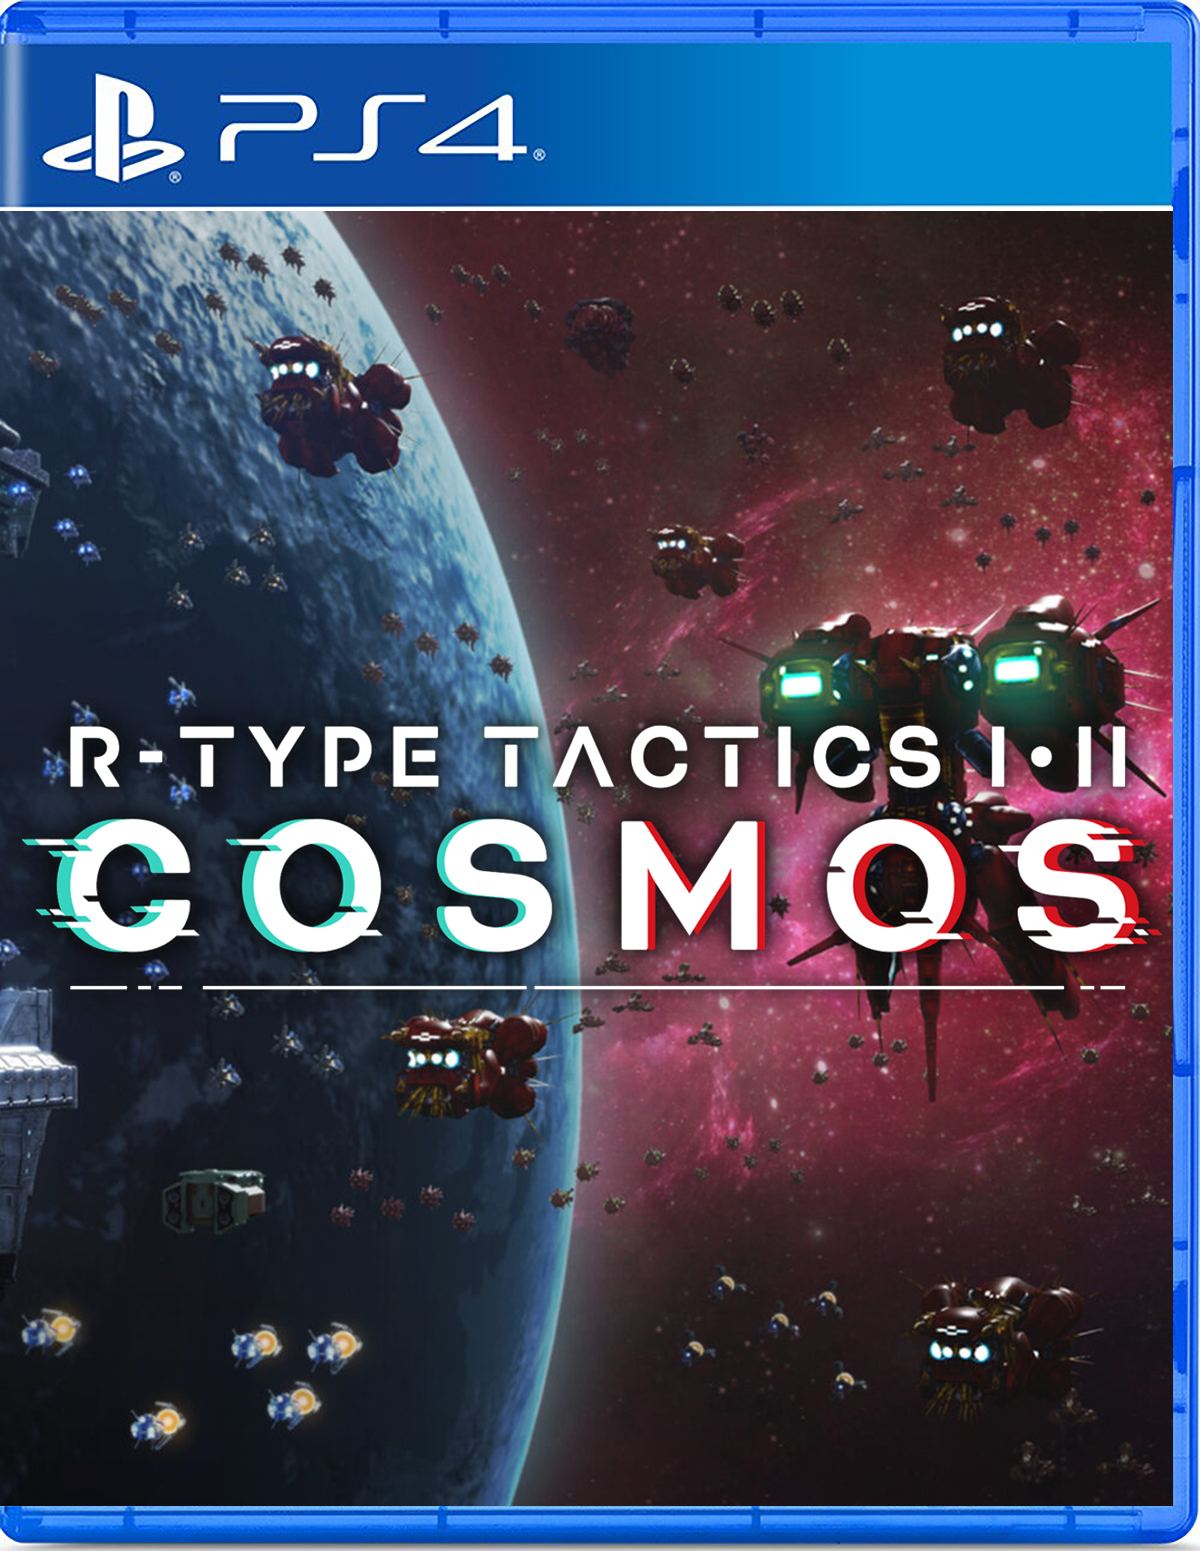 R-Type Tactics I & II Cosmos (Multi-Language) for PlayStation 4 